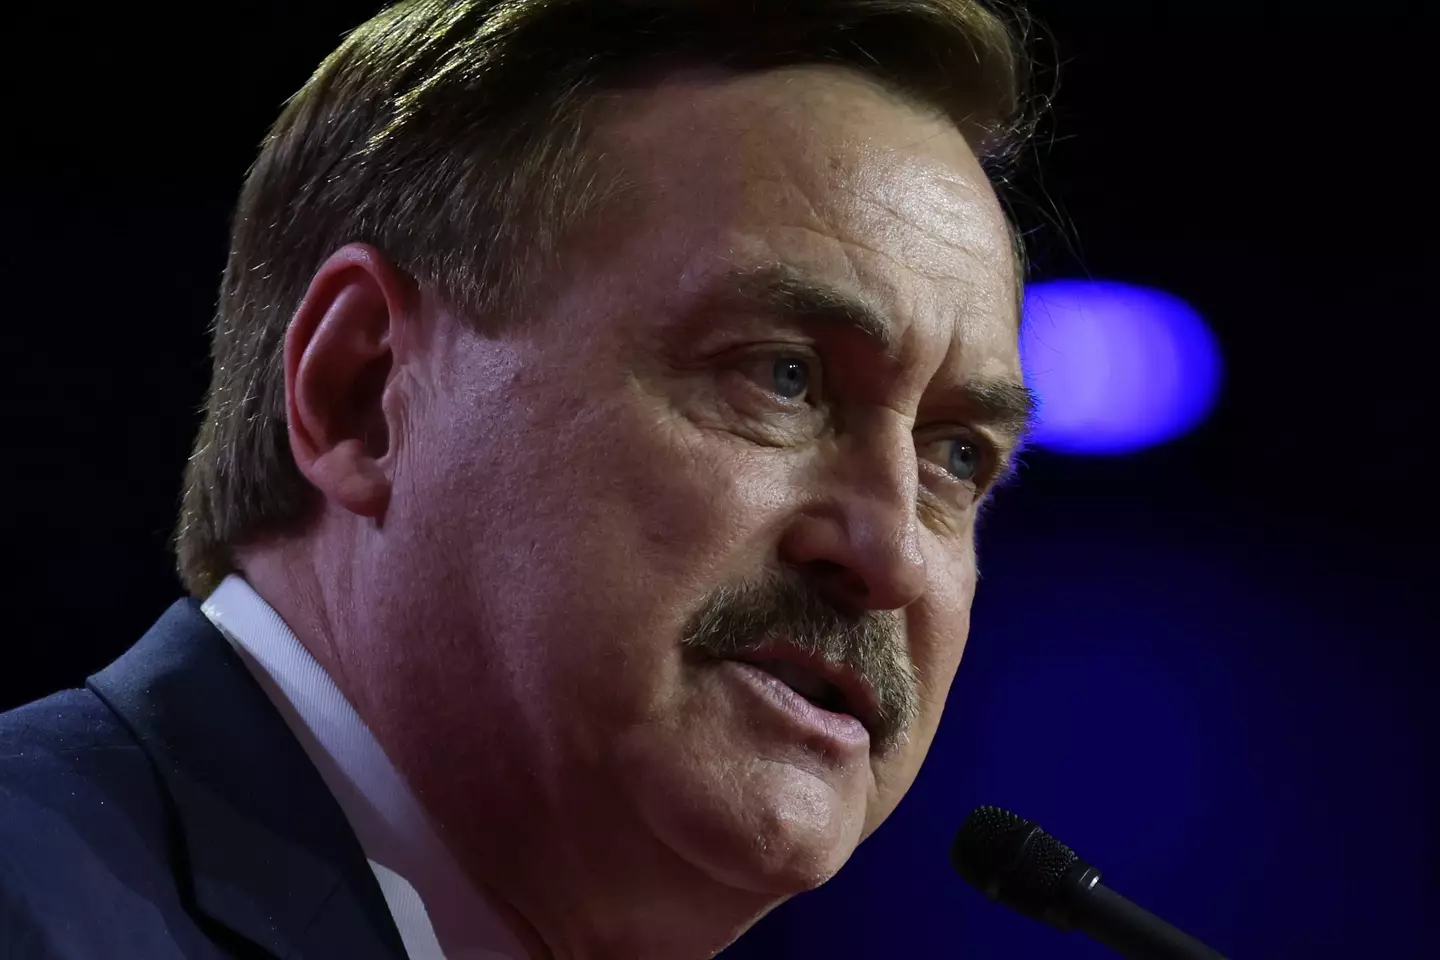 MyPillow CEO Mike Lindell has lost a lot of money in recent years.